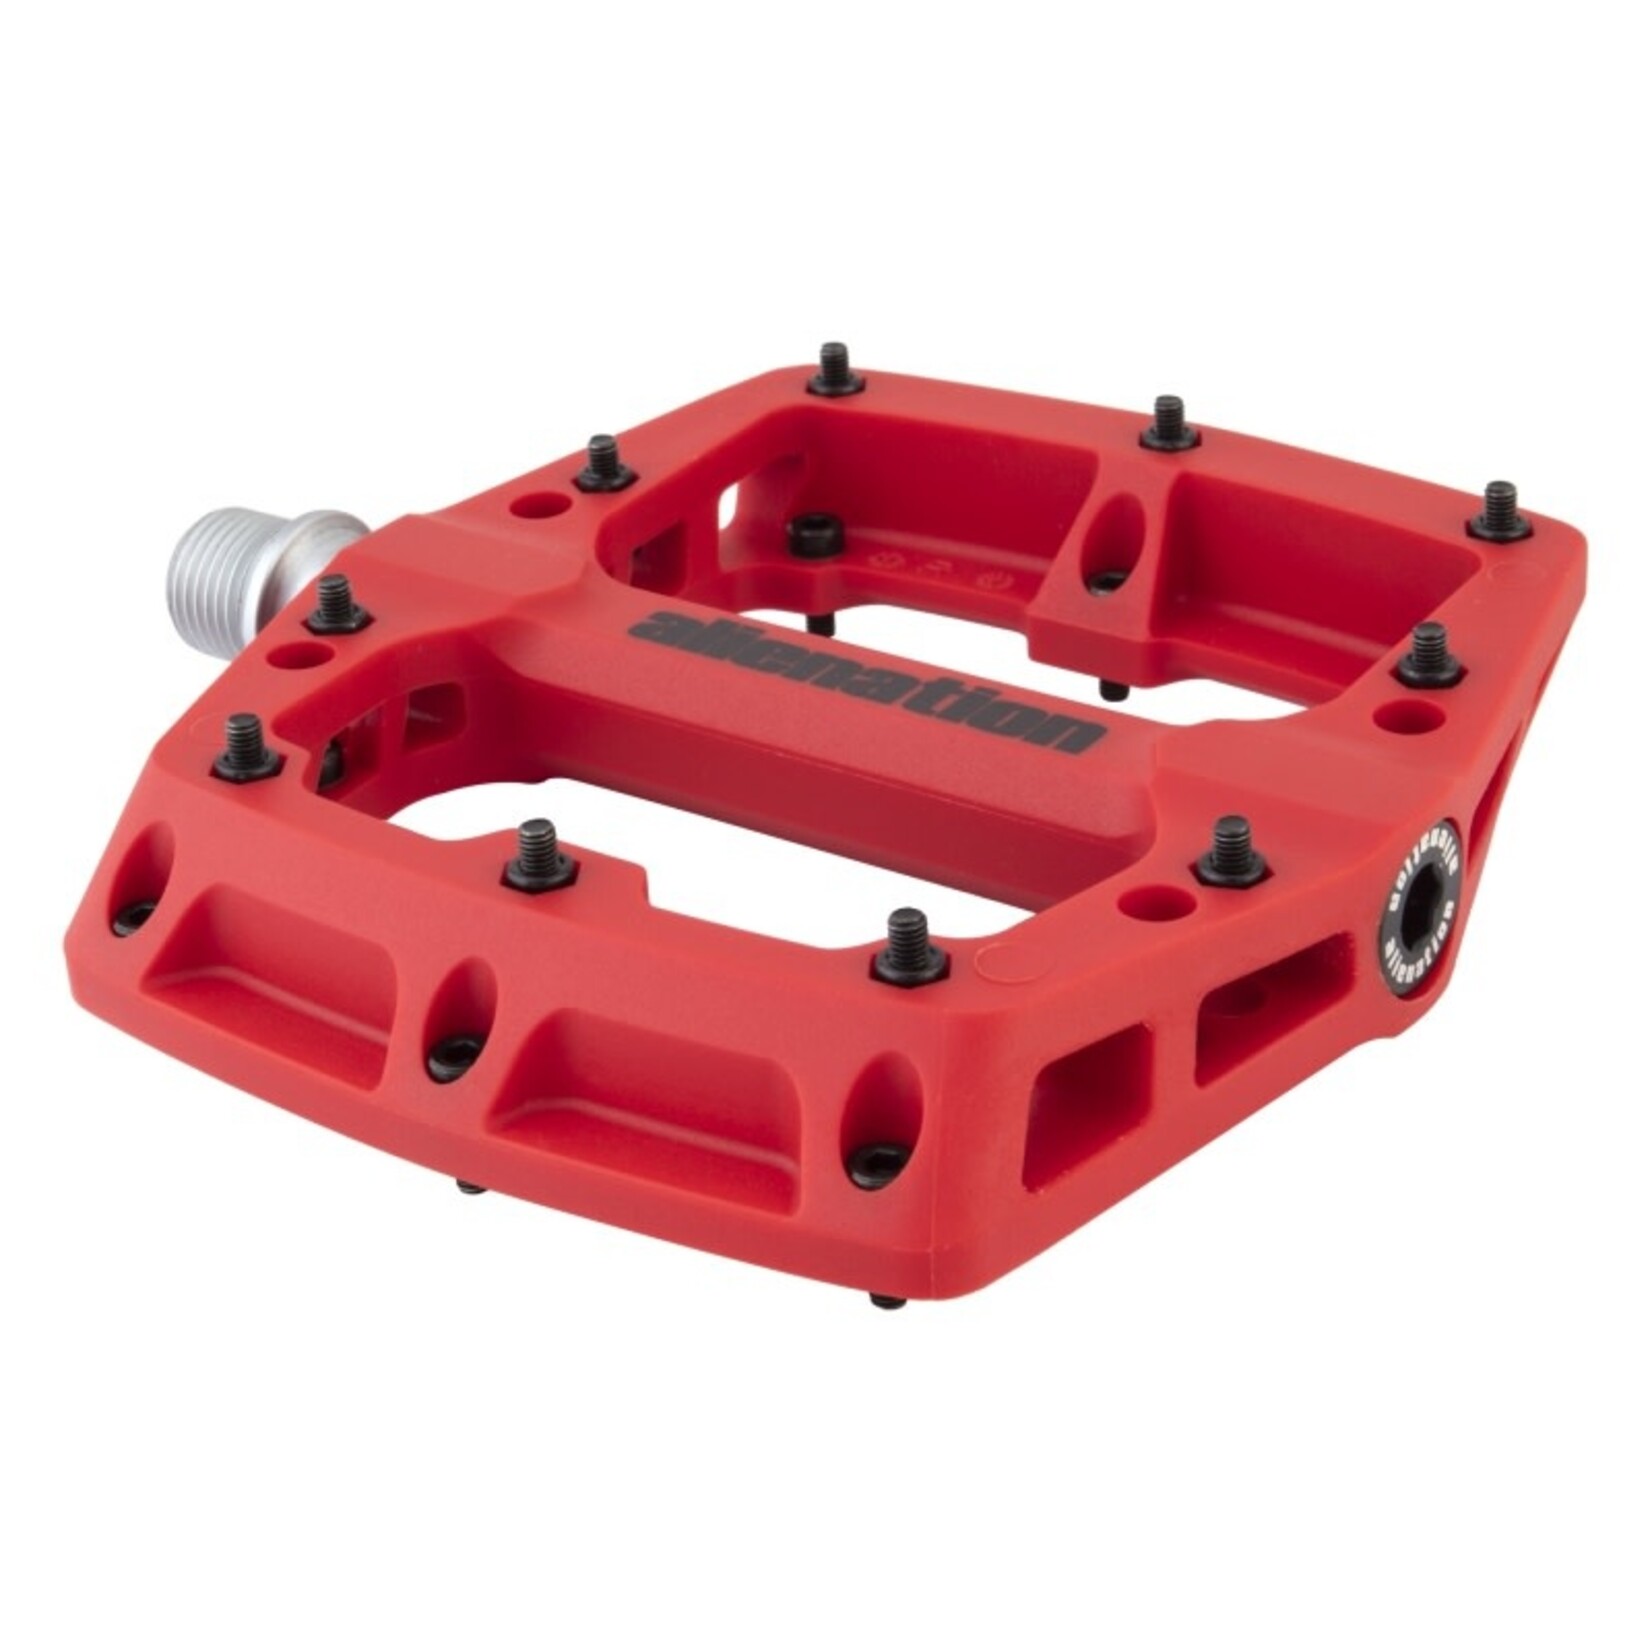 ALIENATION ALIENATION FOOTHOLD Pedals 9/16 Red